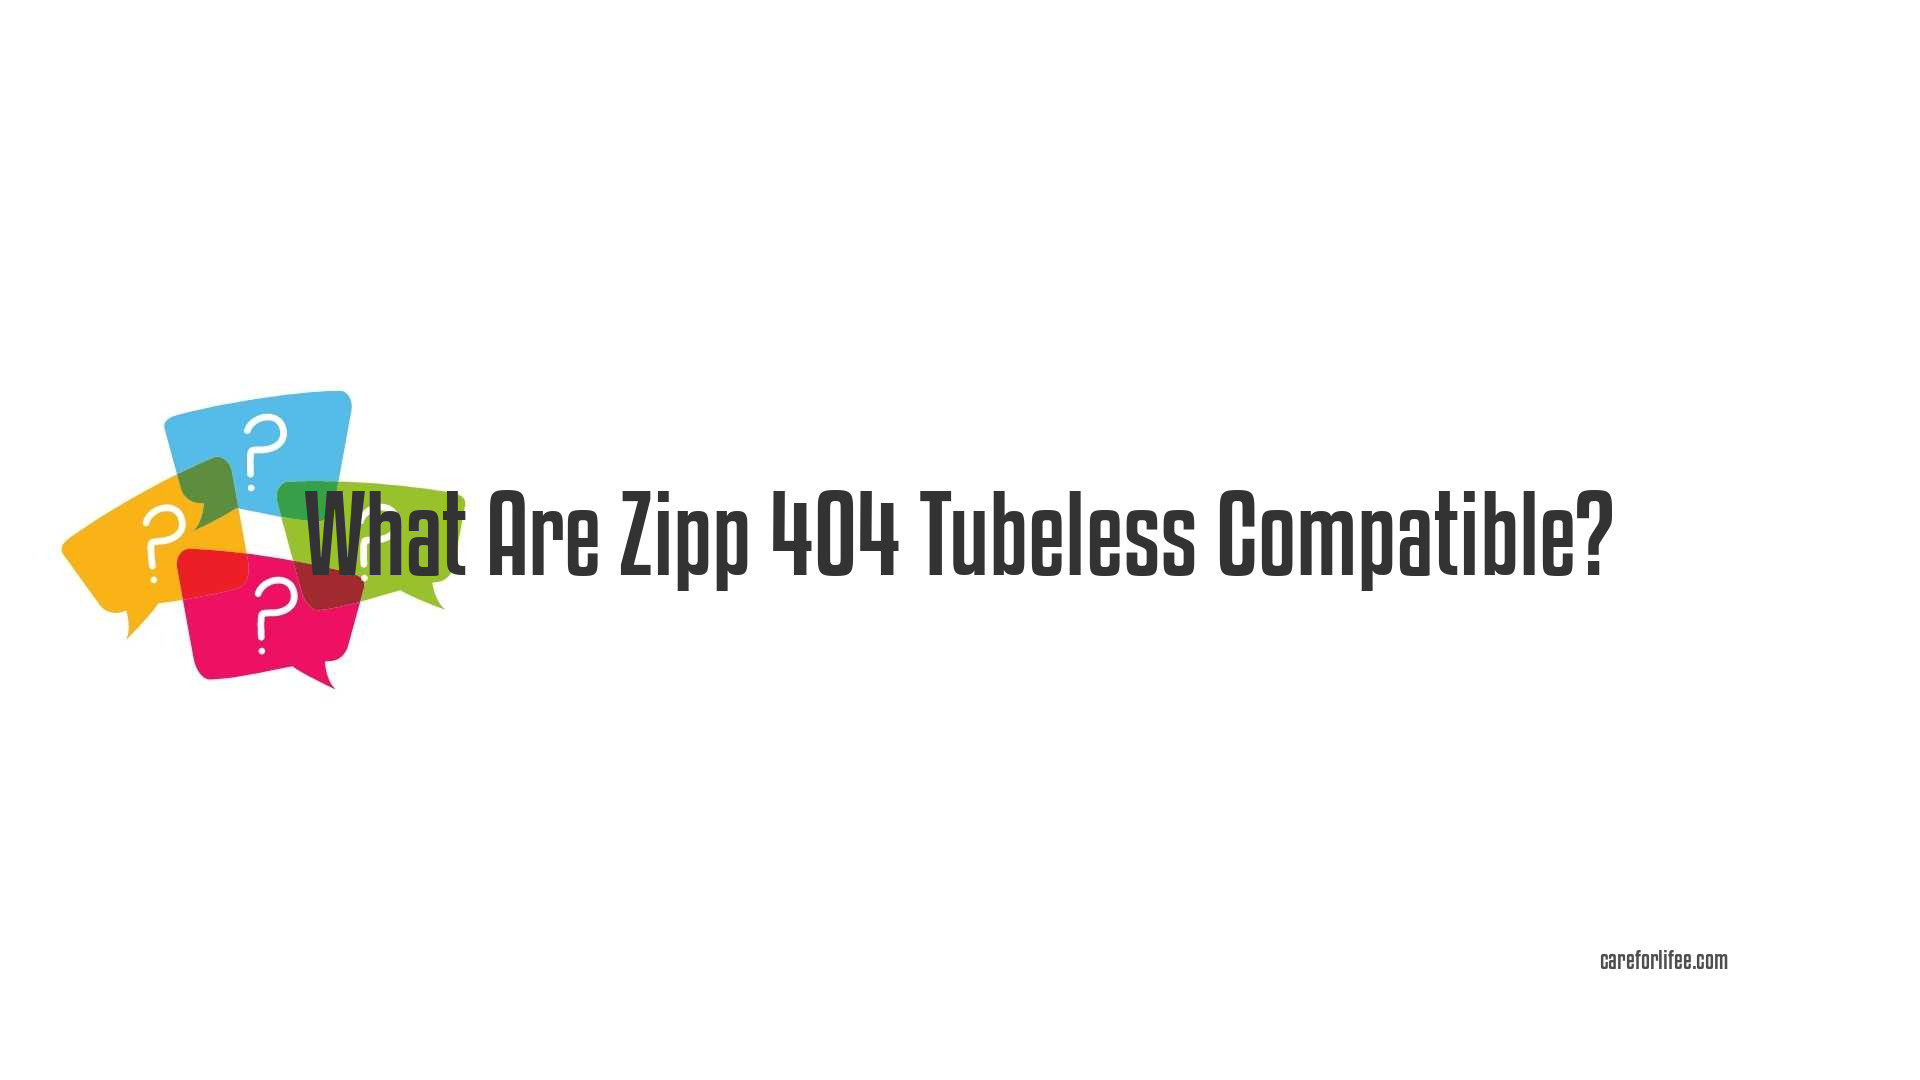 What Are Zipp 404 Tubeless Compatible?